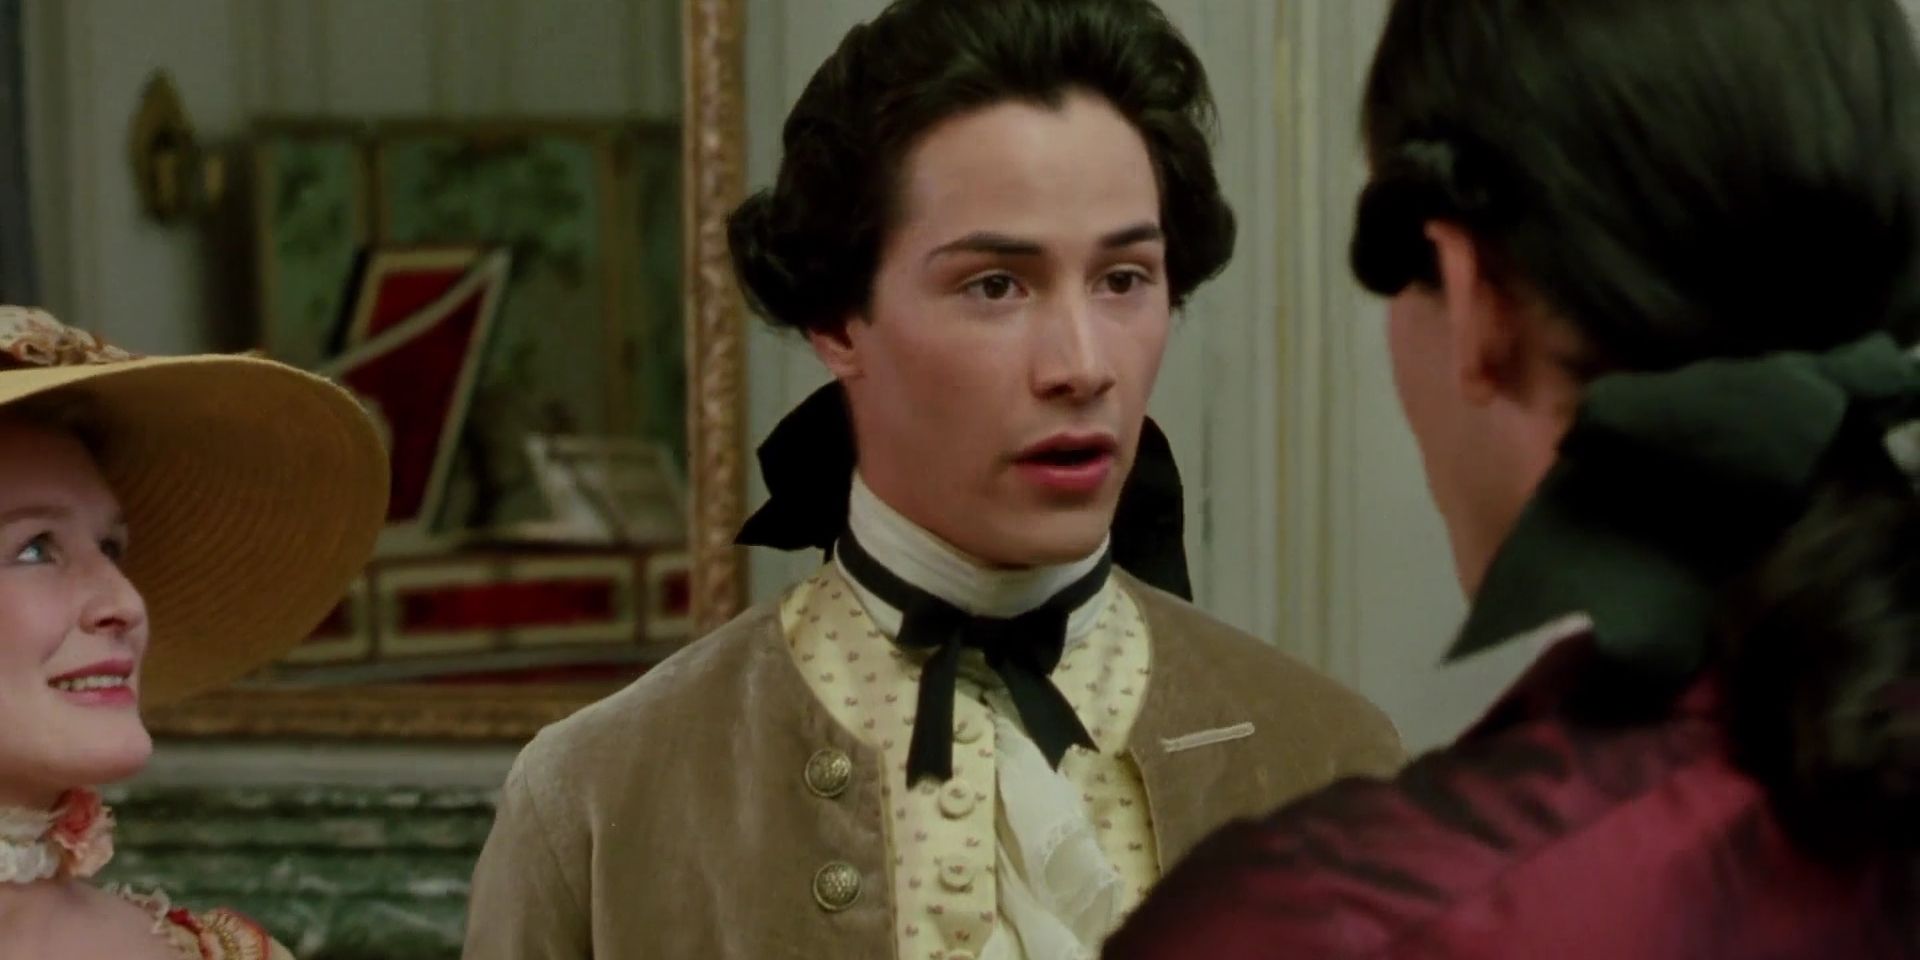 A photo from Dangerous Liaisons featuring Keanu Reeves as his character Le Chevalier Raphael Danceny